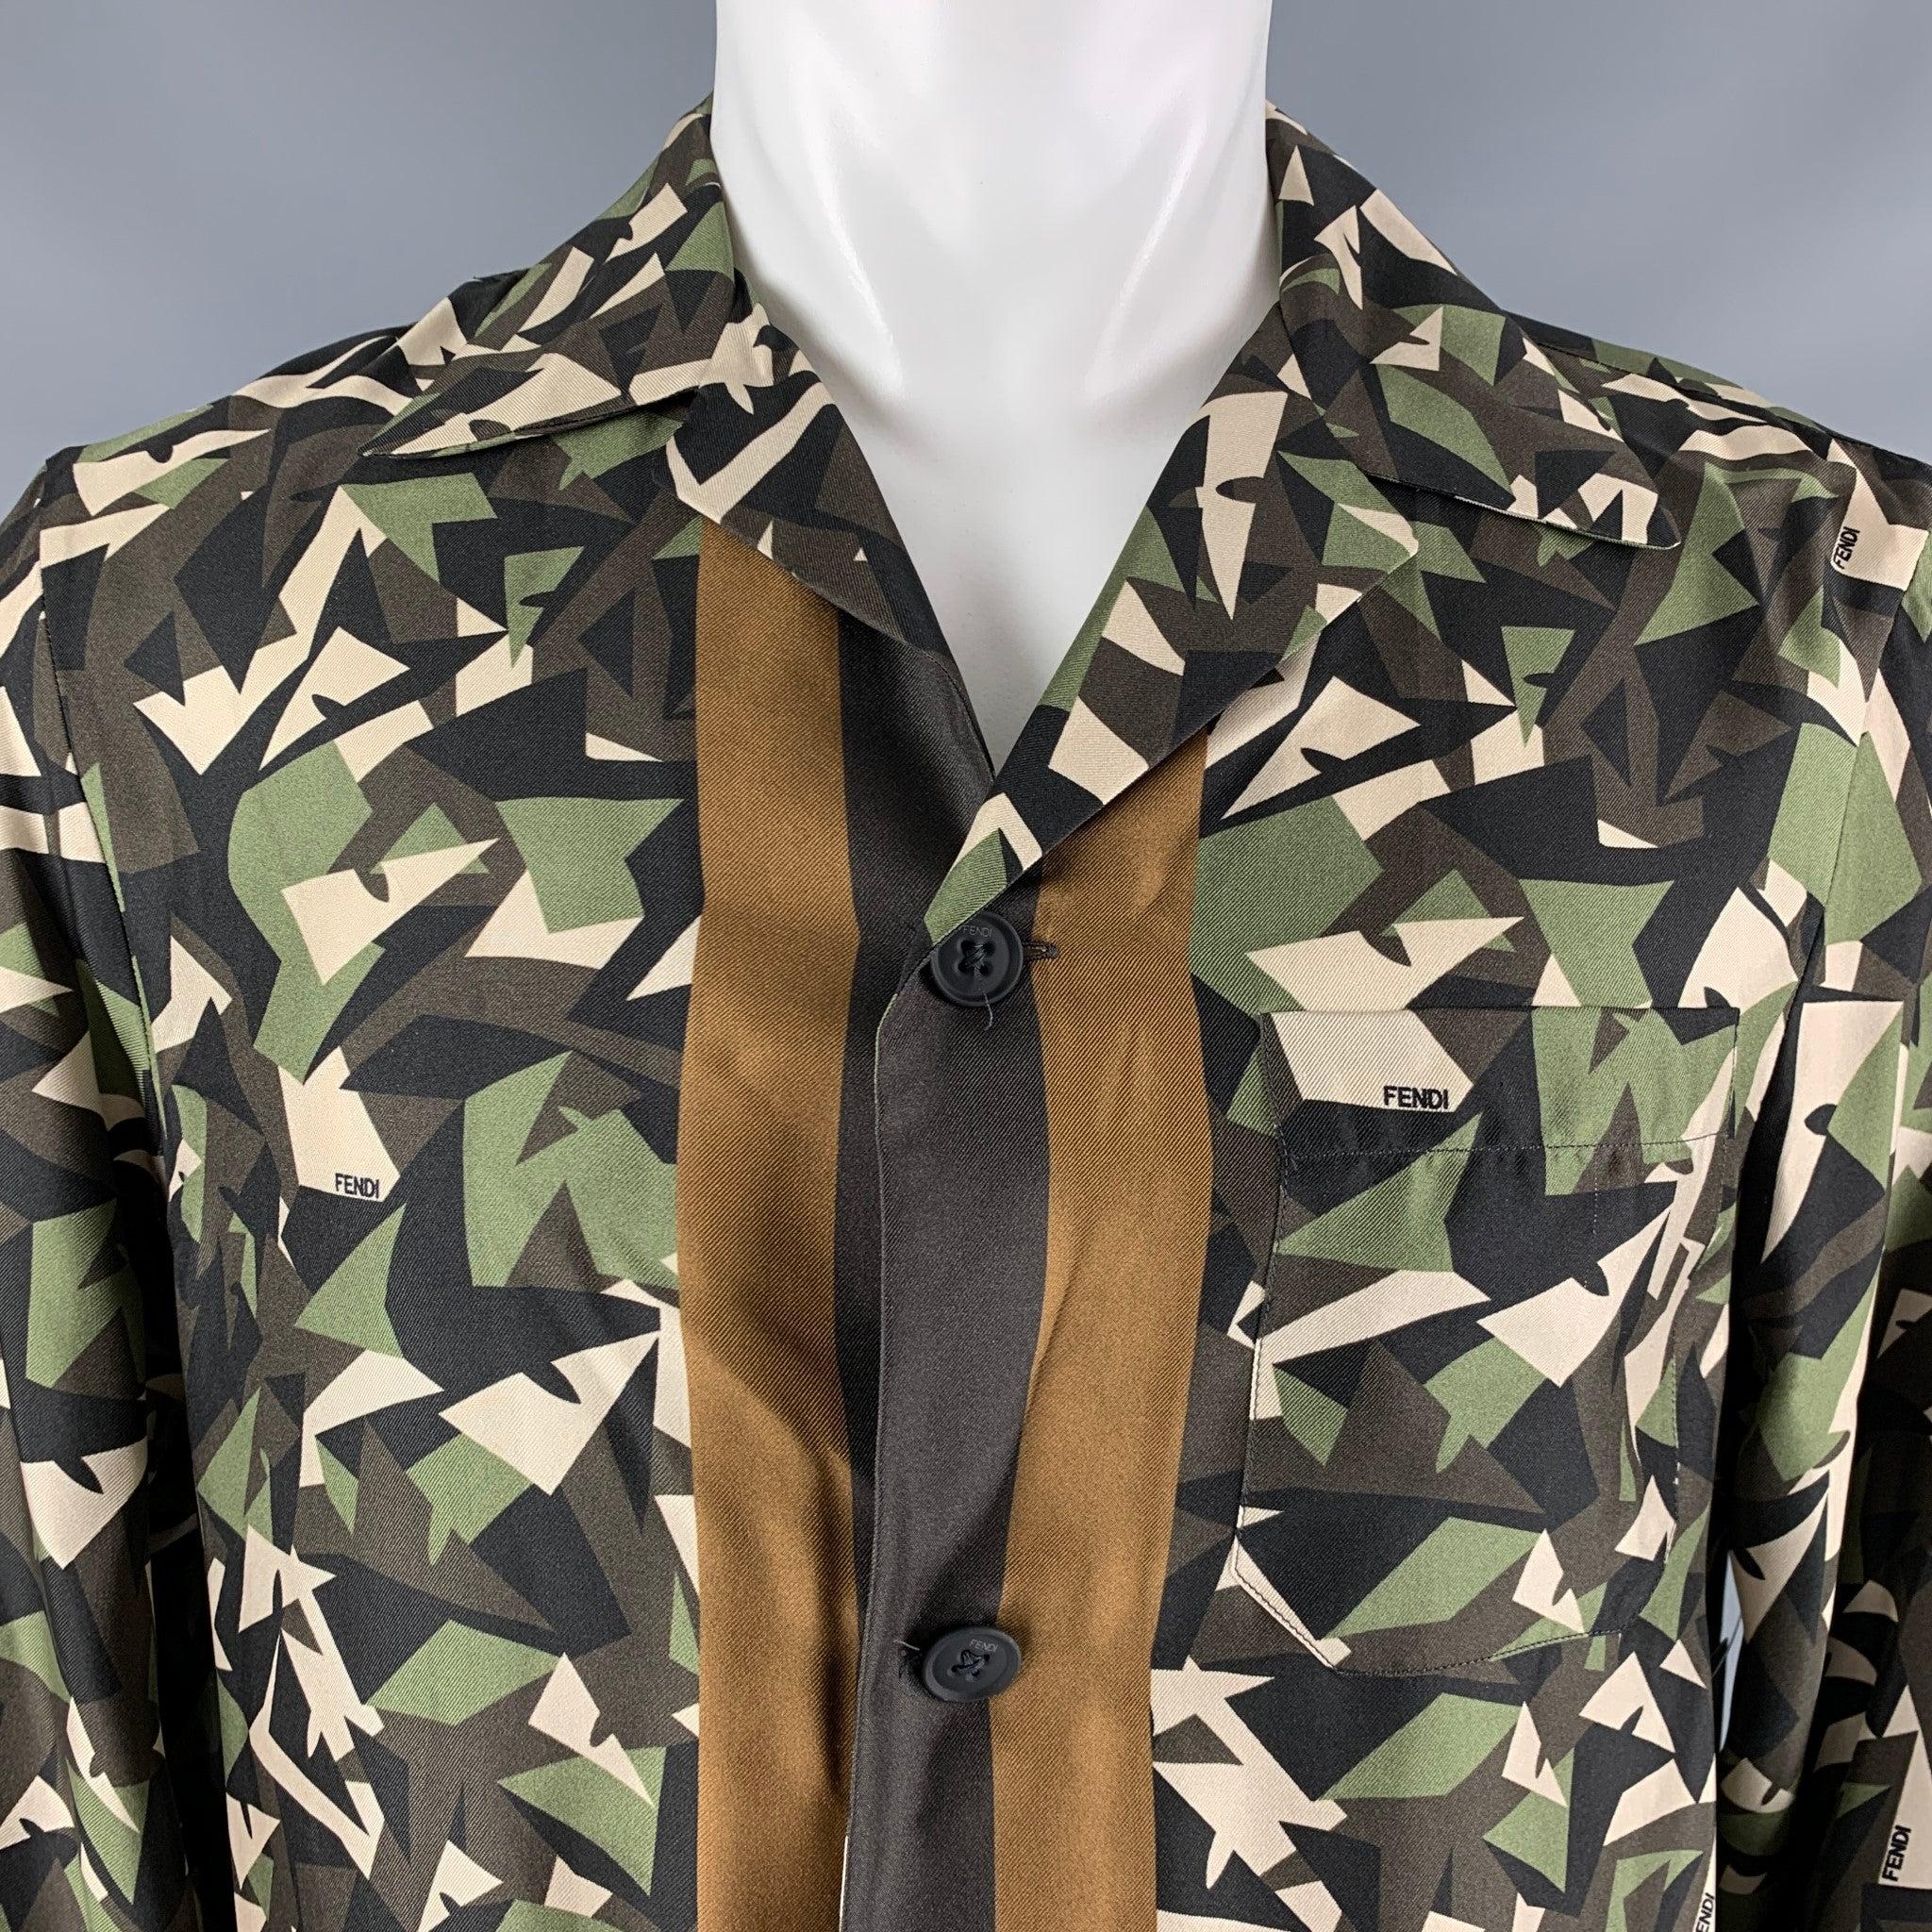 FENDI shirt comes in brown and green camouflage silk woven material with monster Fendi signature print, contrast detail, a button up closure. Made in Italy.Excellent Pre-Owned Condition. 

Marked:   40 

Measurements: 
 
Shoulder: 18 inches Chest: